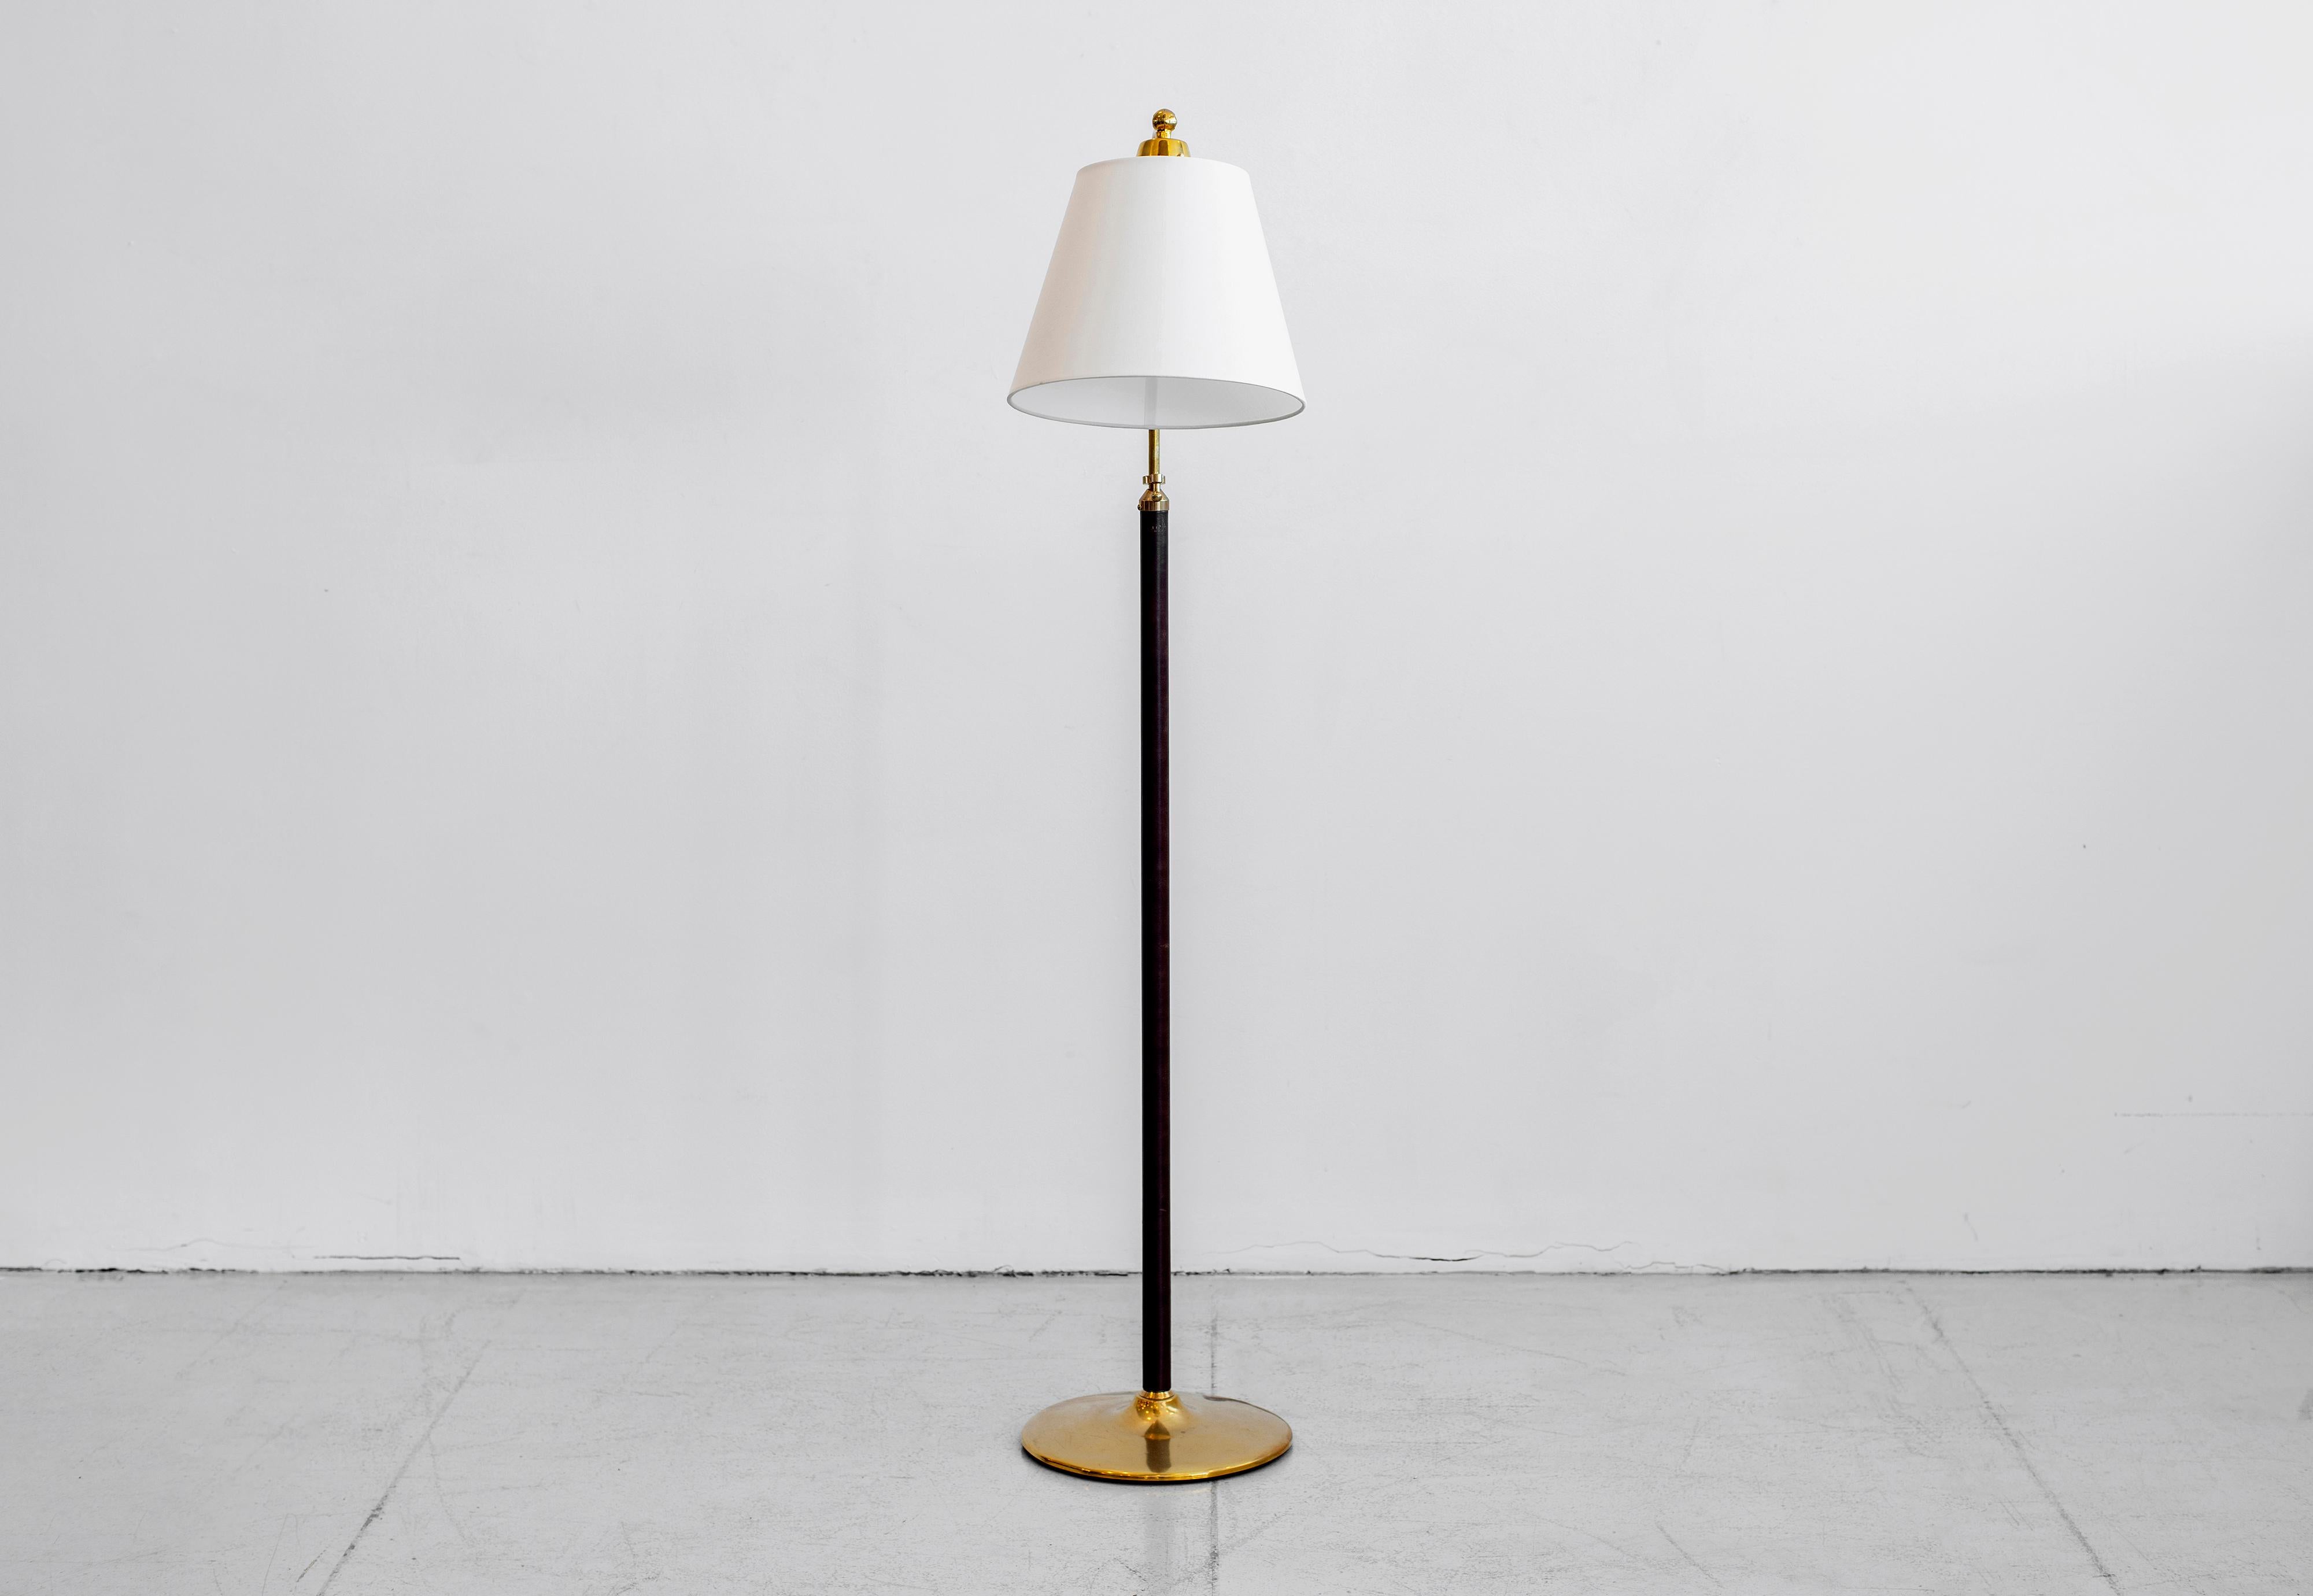 Handsome French floor lamp in the style of Jacques Adnet. Brass stem wrapped in dark brown leather with contrast stitching and brass disc base. Great age and patina. Shade pivots and brass neck is height adjustable. Newly re-wired with new shade.